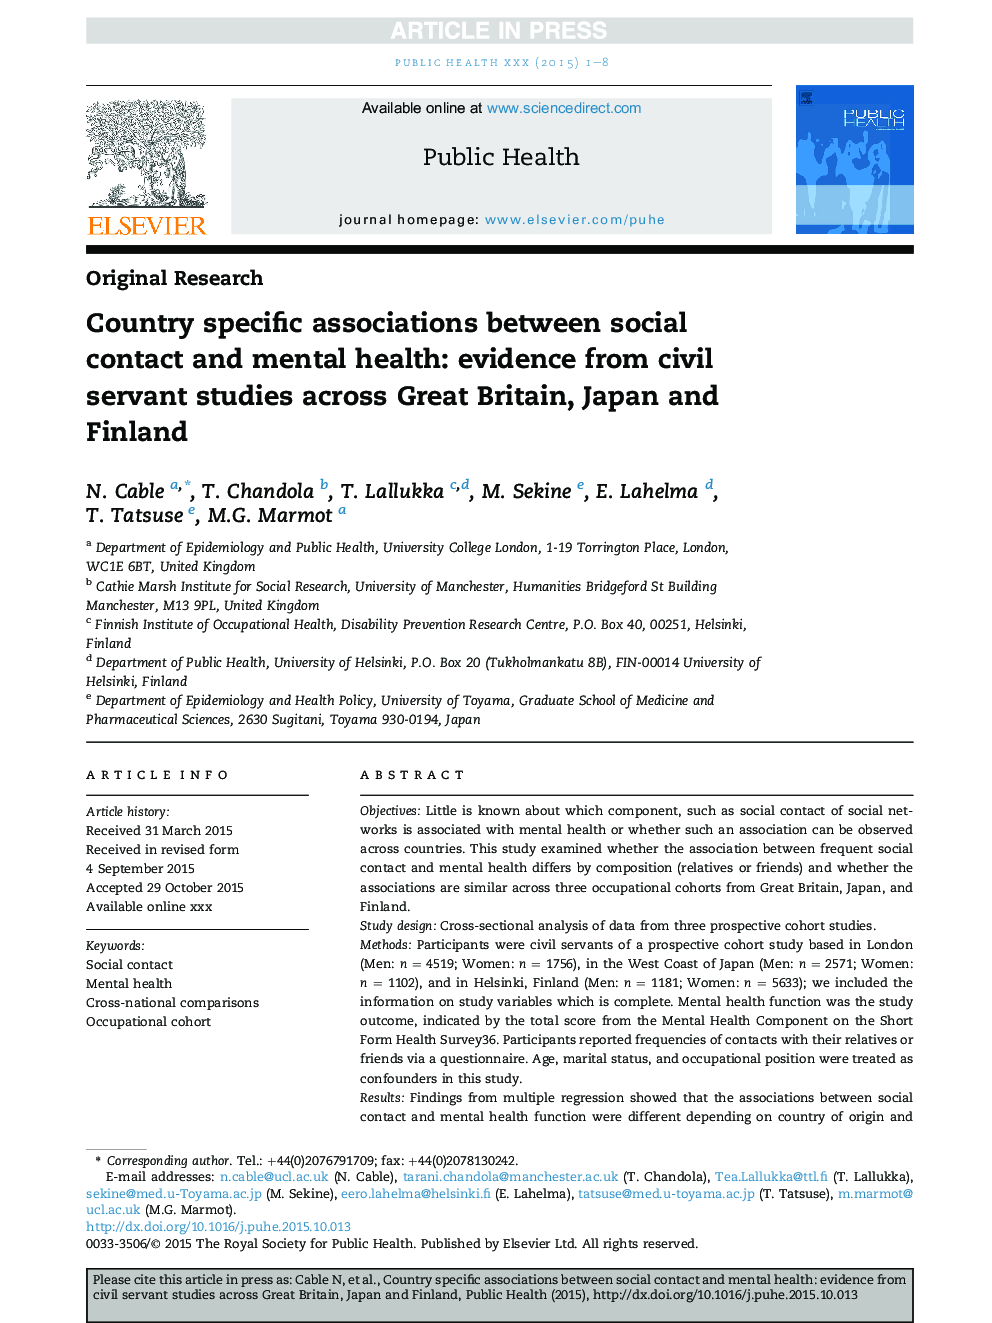 Country specific associations between social contact and mental health: evidence from civil servant studies across Great Britain, Japan and Finland